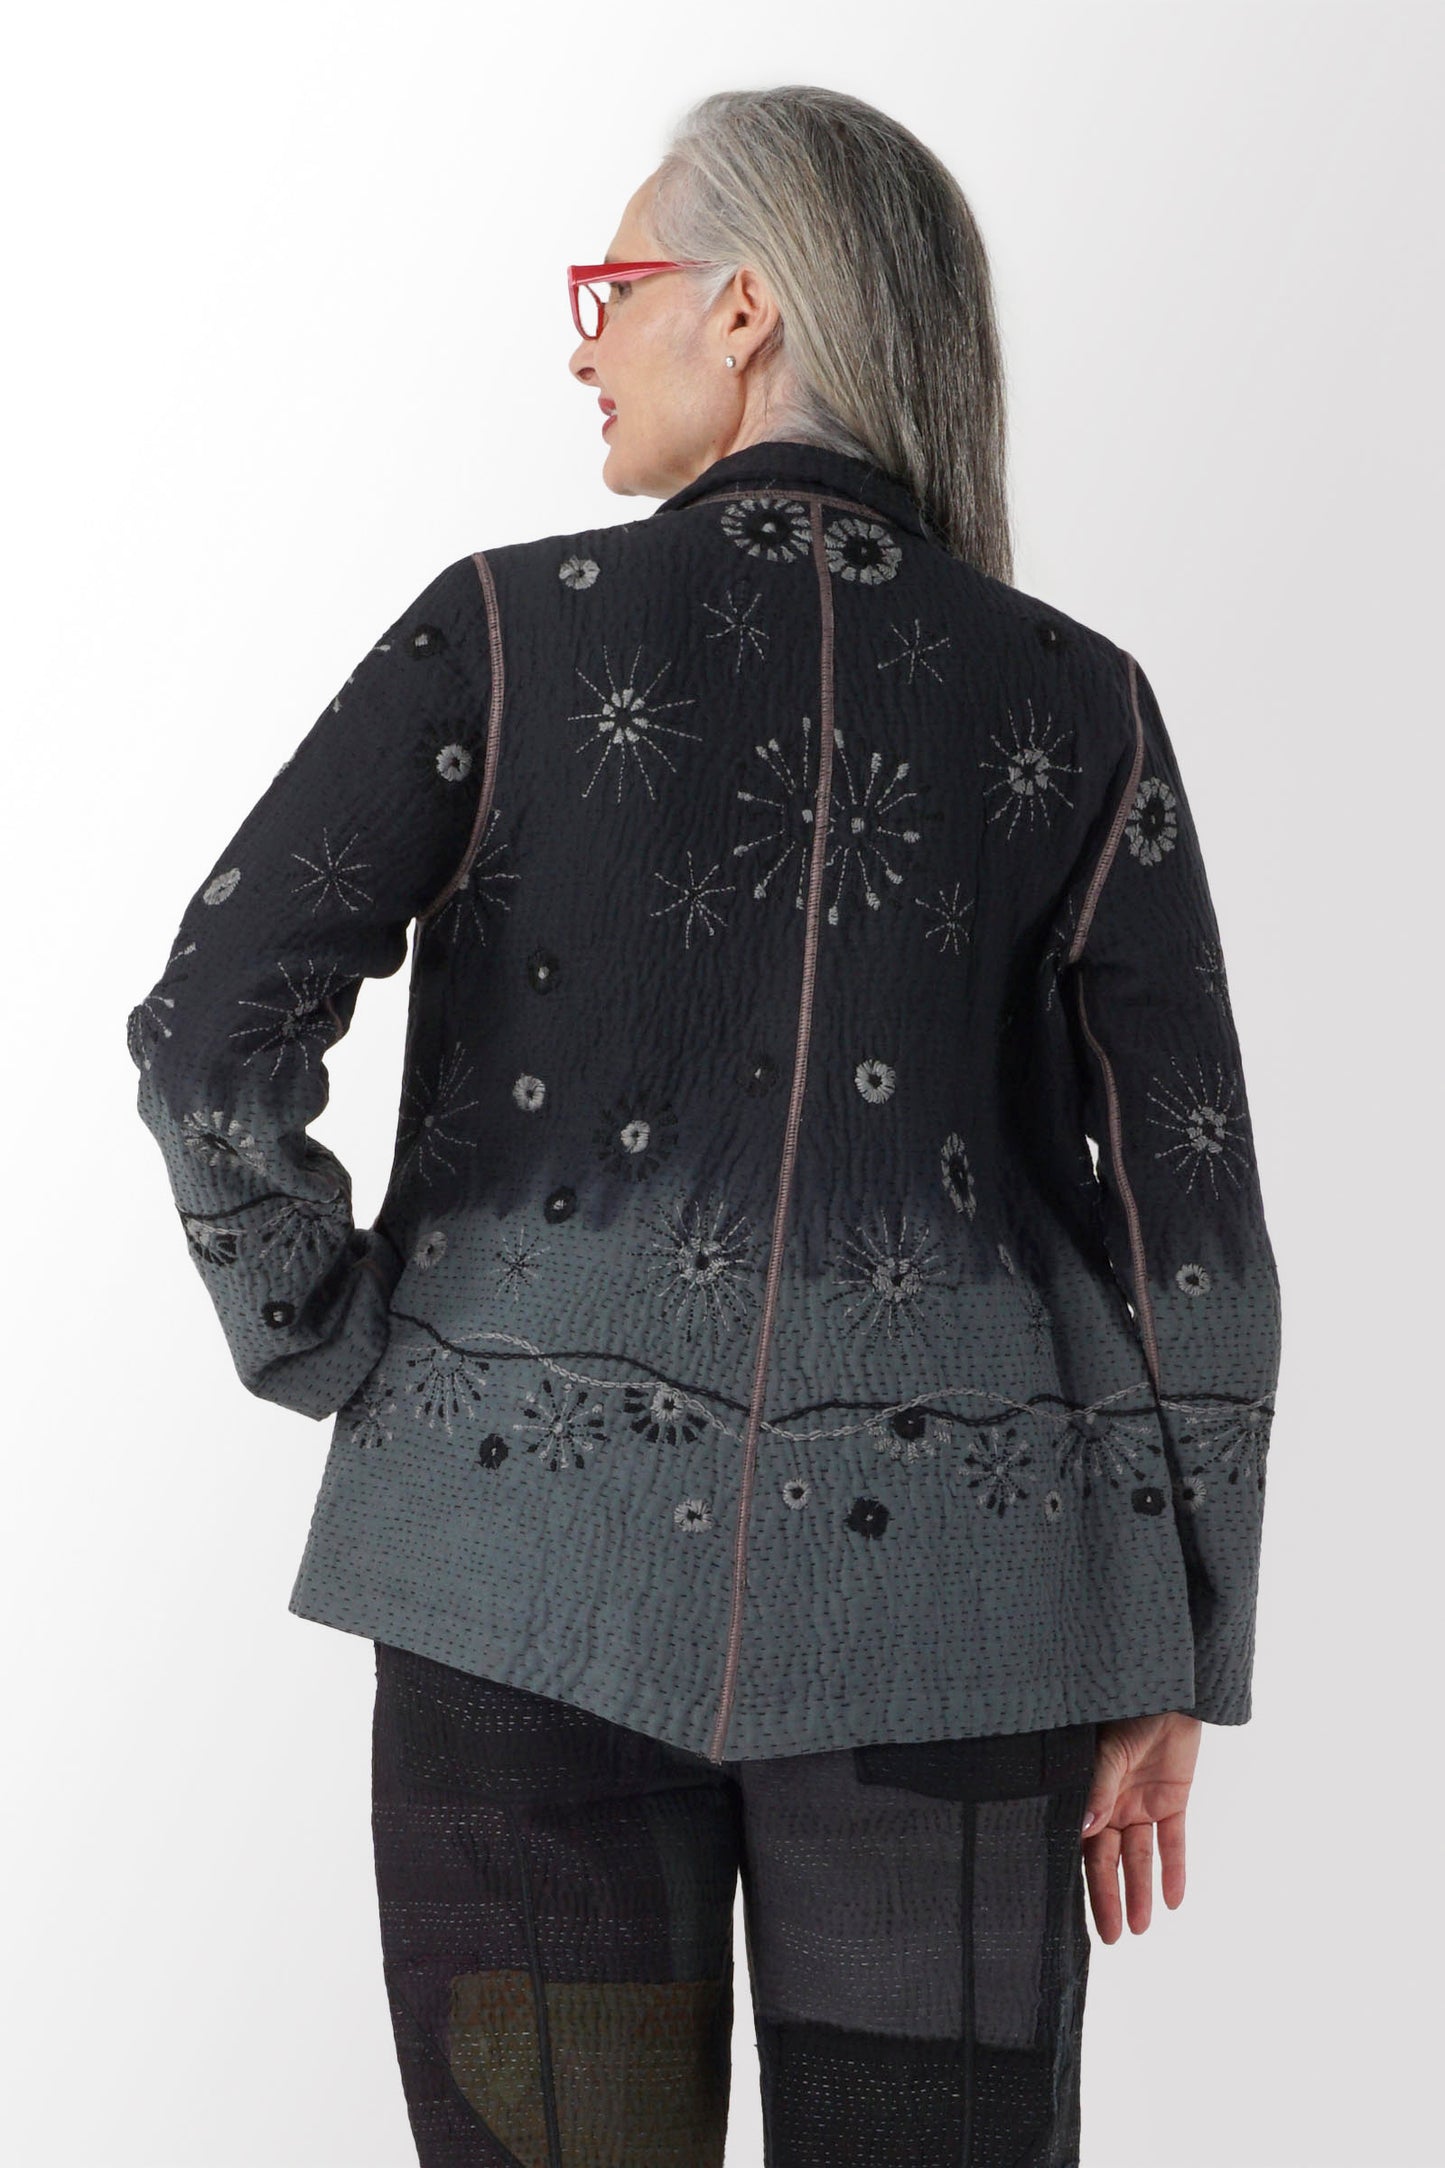 OMBRE SUN RALLI FIREWORKS KANTHA SIMPLE JACKET - of4022-gry -